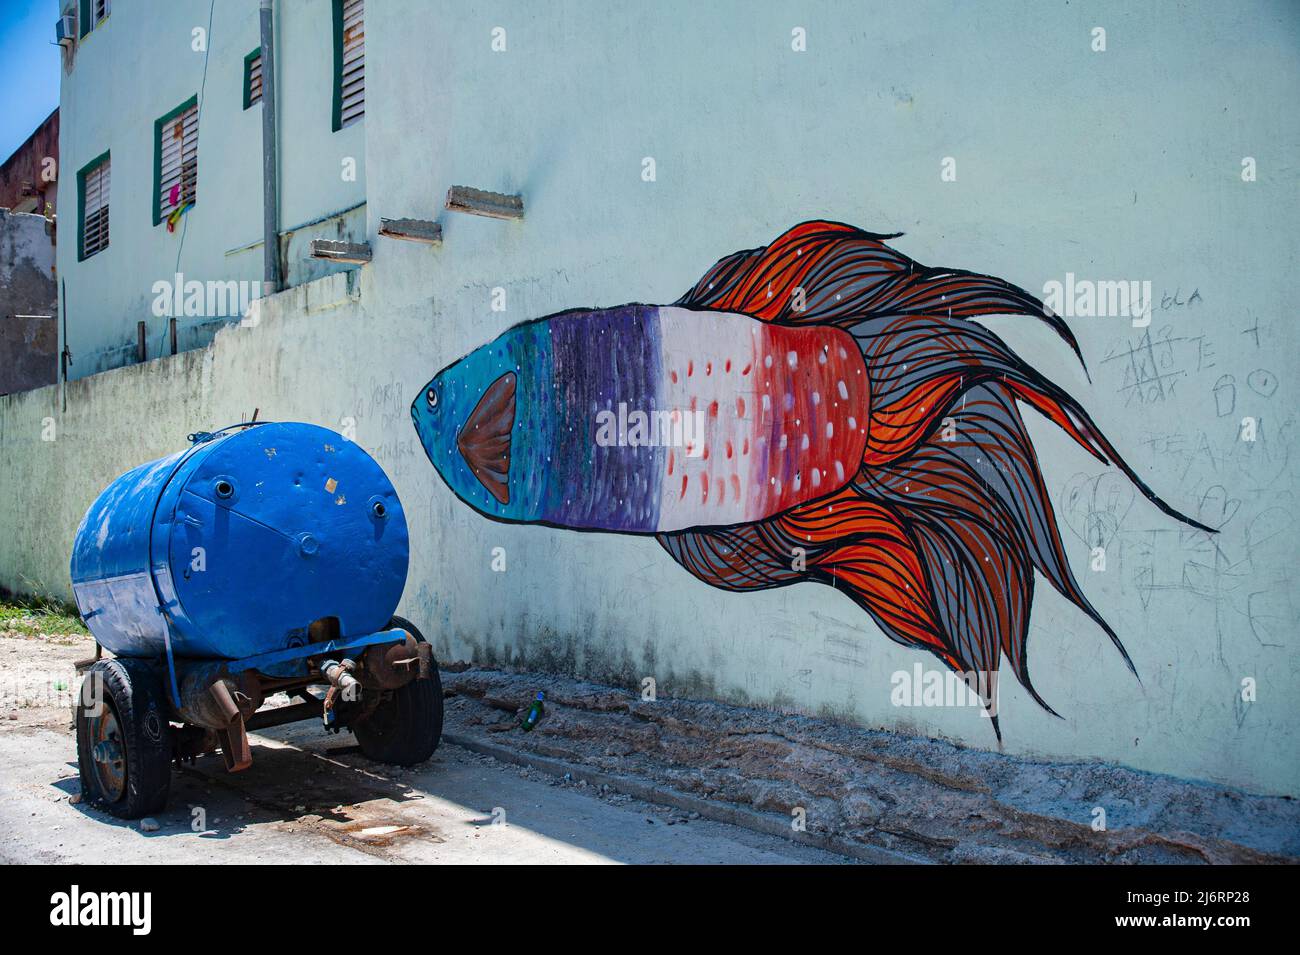 Mural artwork of a colorful fish swimming with image of a tic-tac-toe game on a building wall in Havana, Cuba. Stock Photo